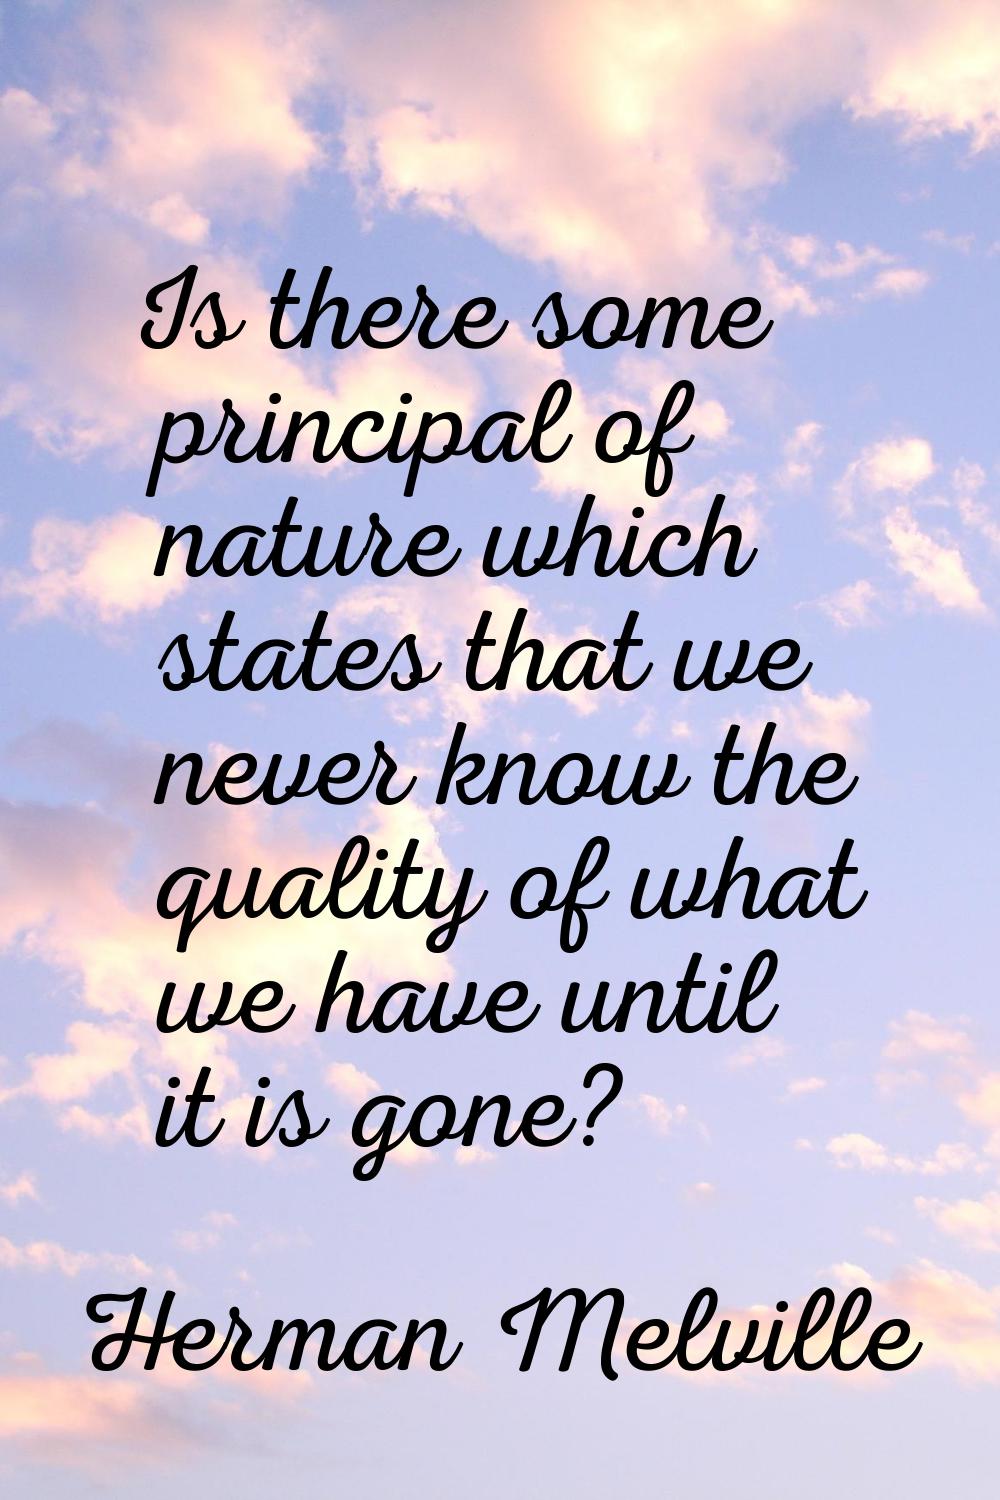 Is there some principal of nature which states that we never know the quality of what we have until